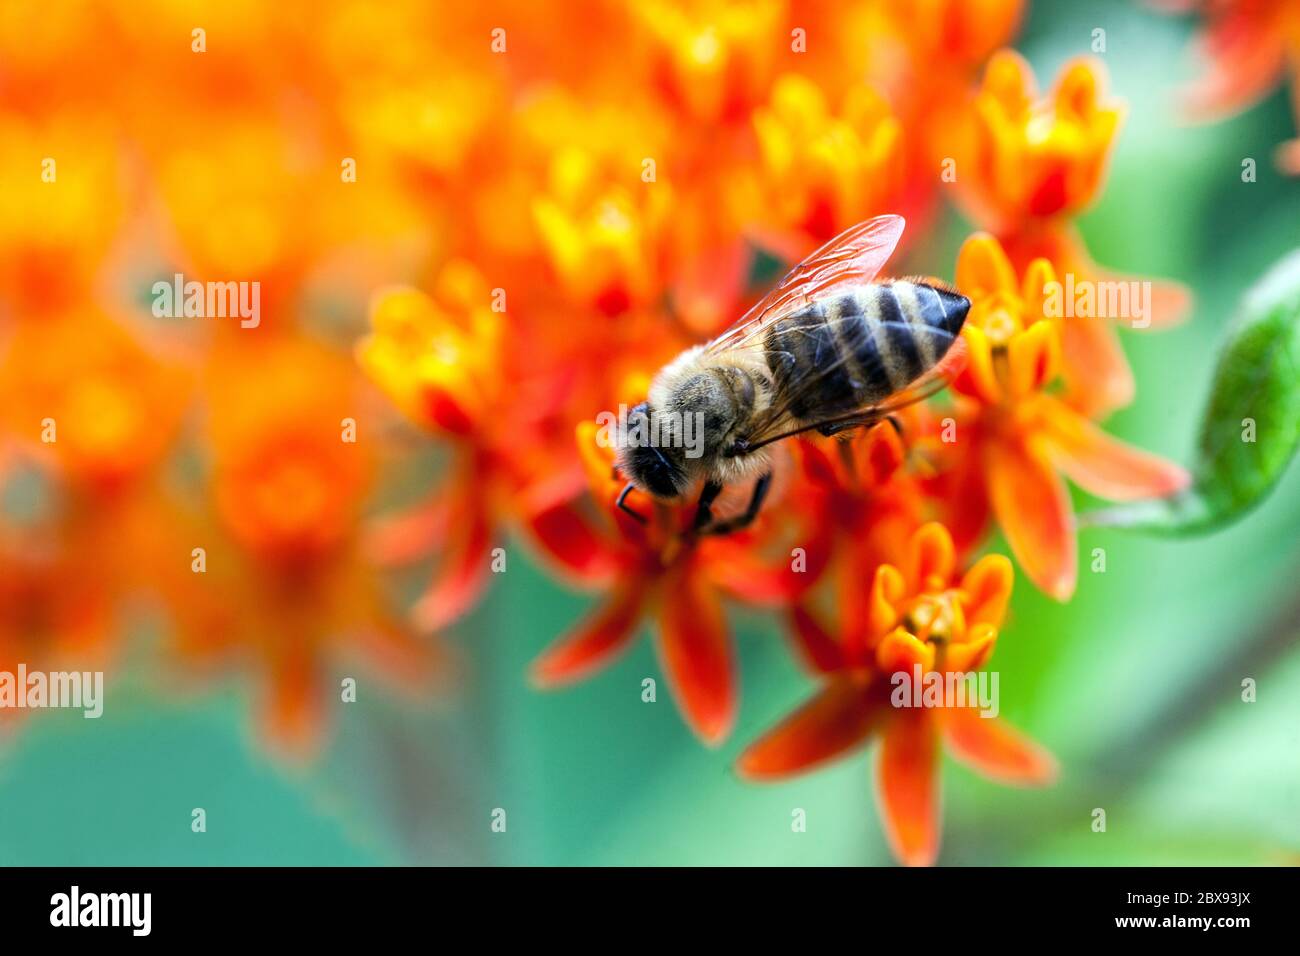 Bee on flower, close up honeybee collecting nectar Stock Photo